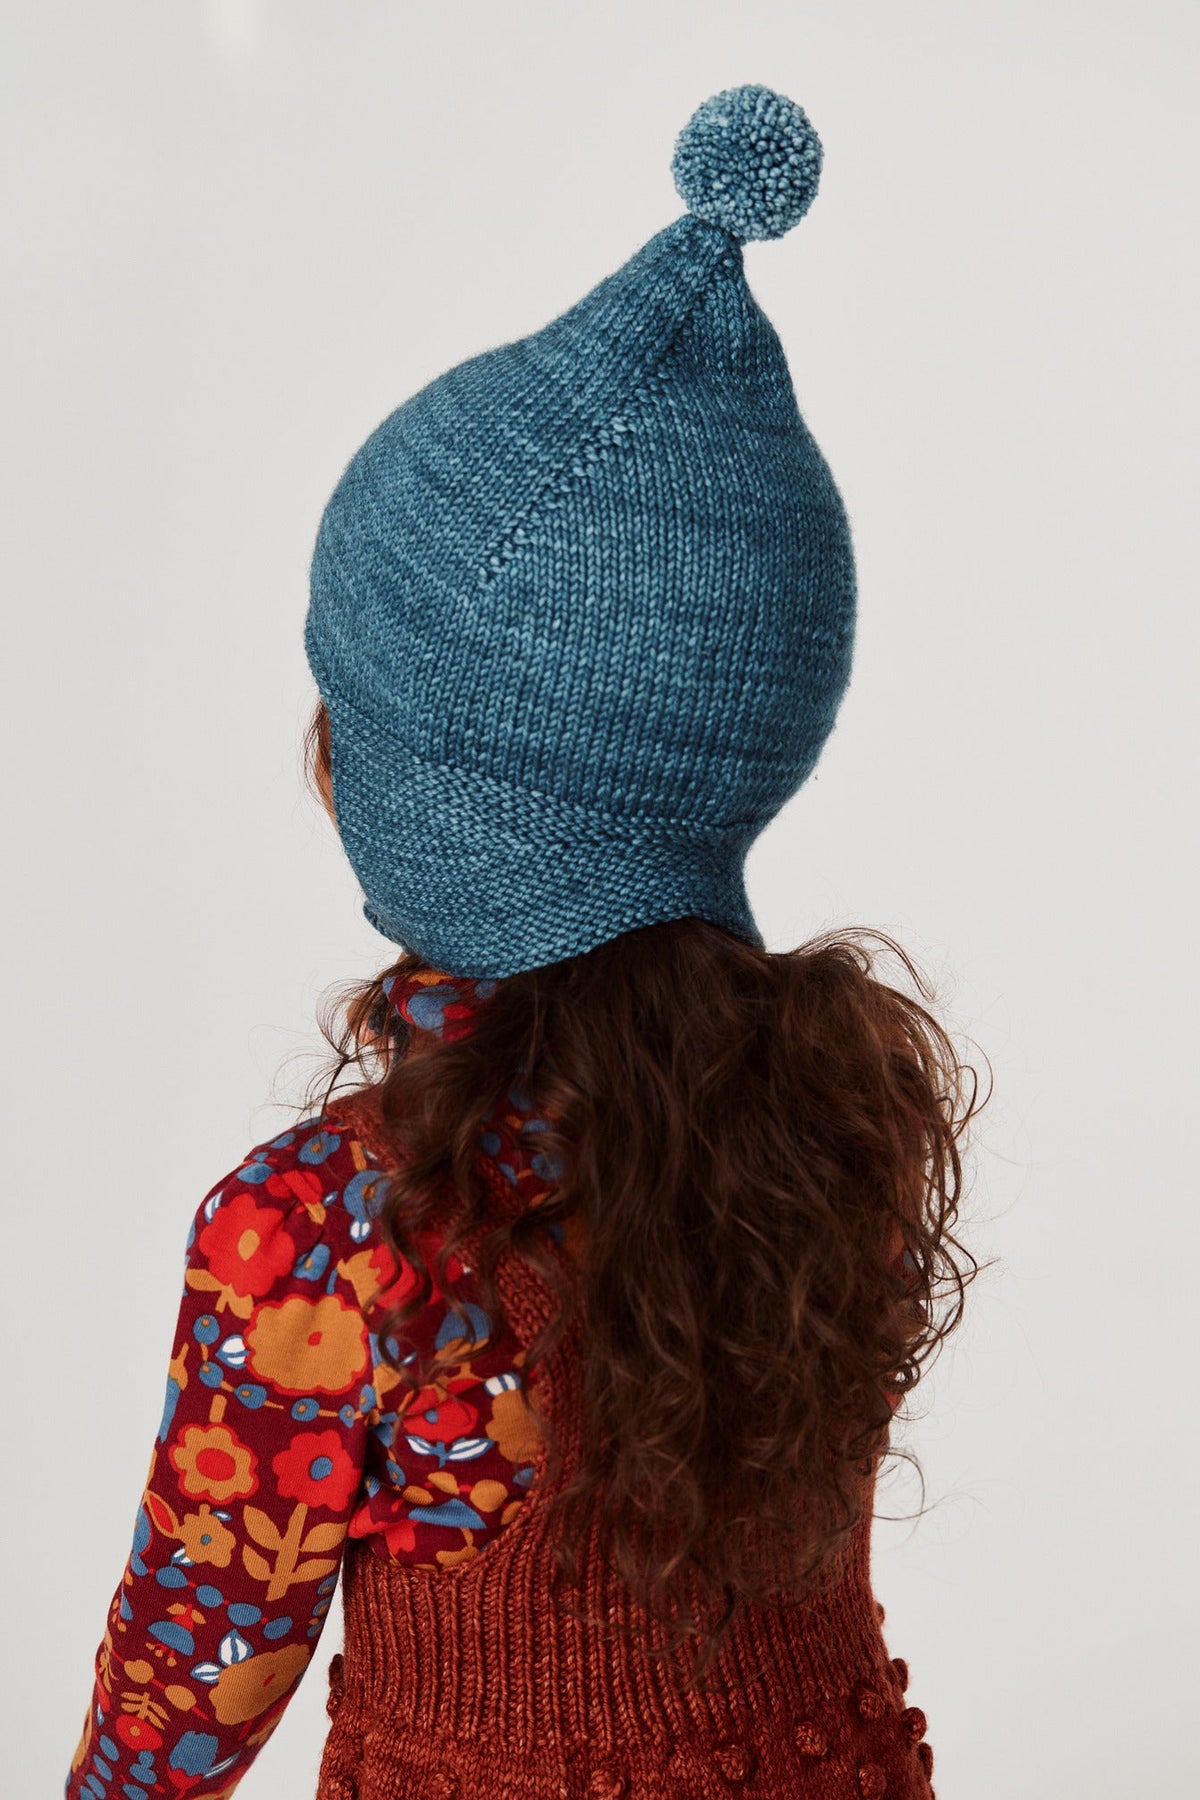 Pointy Peak Hat - Dusk+Model is 36 inches tall, 30lbs, wearing a size 4-8y